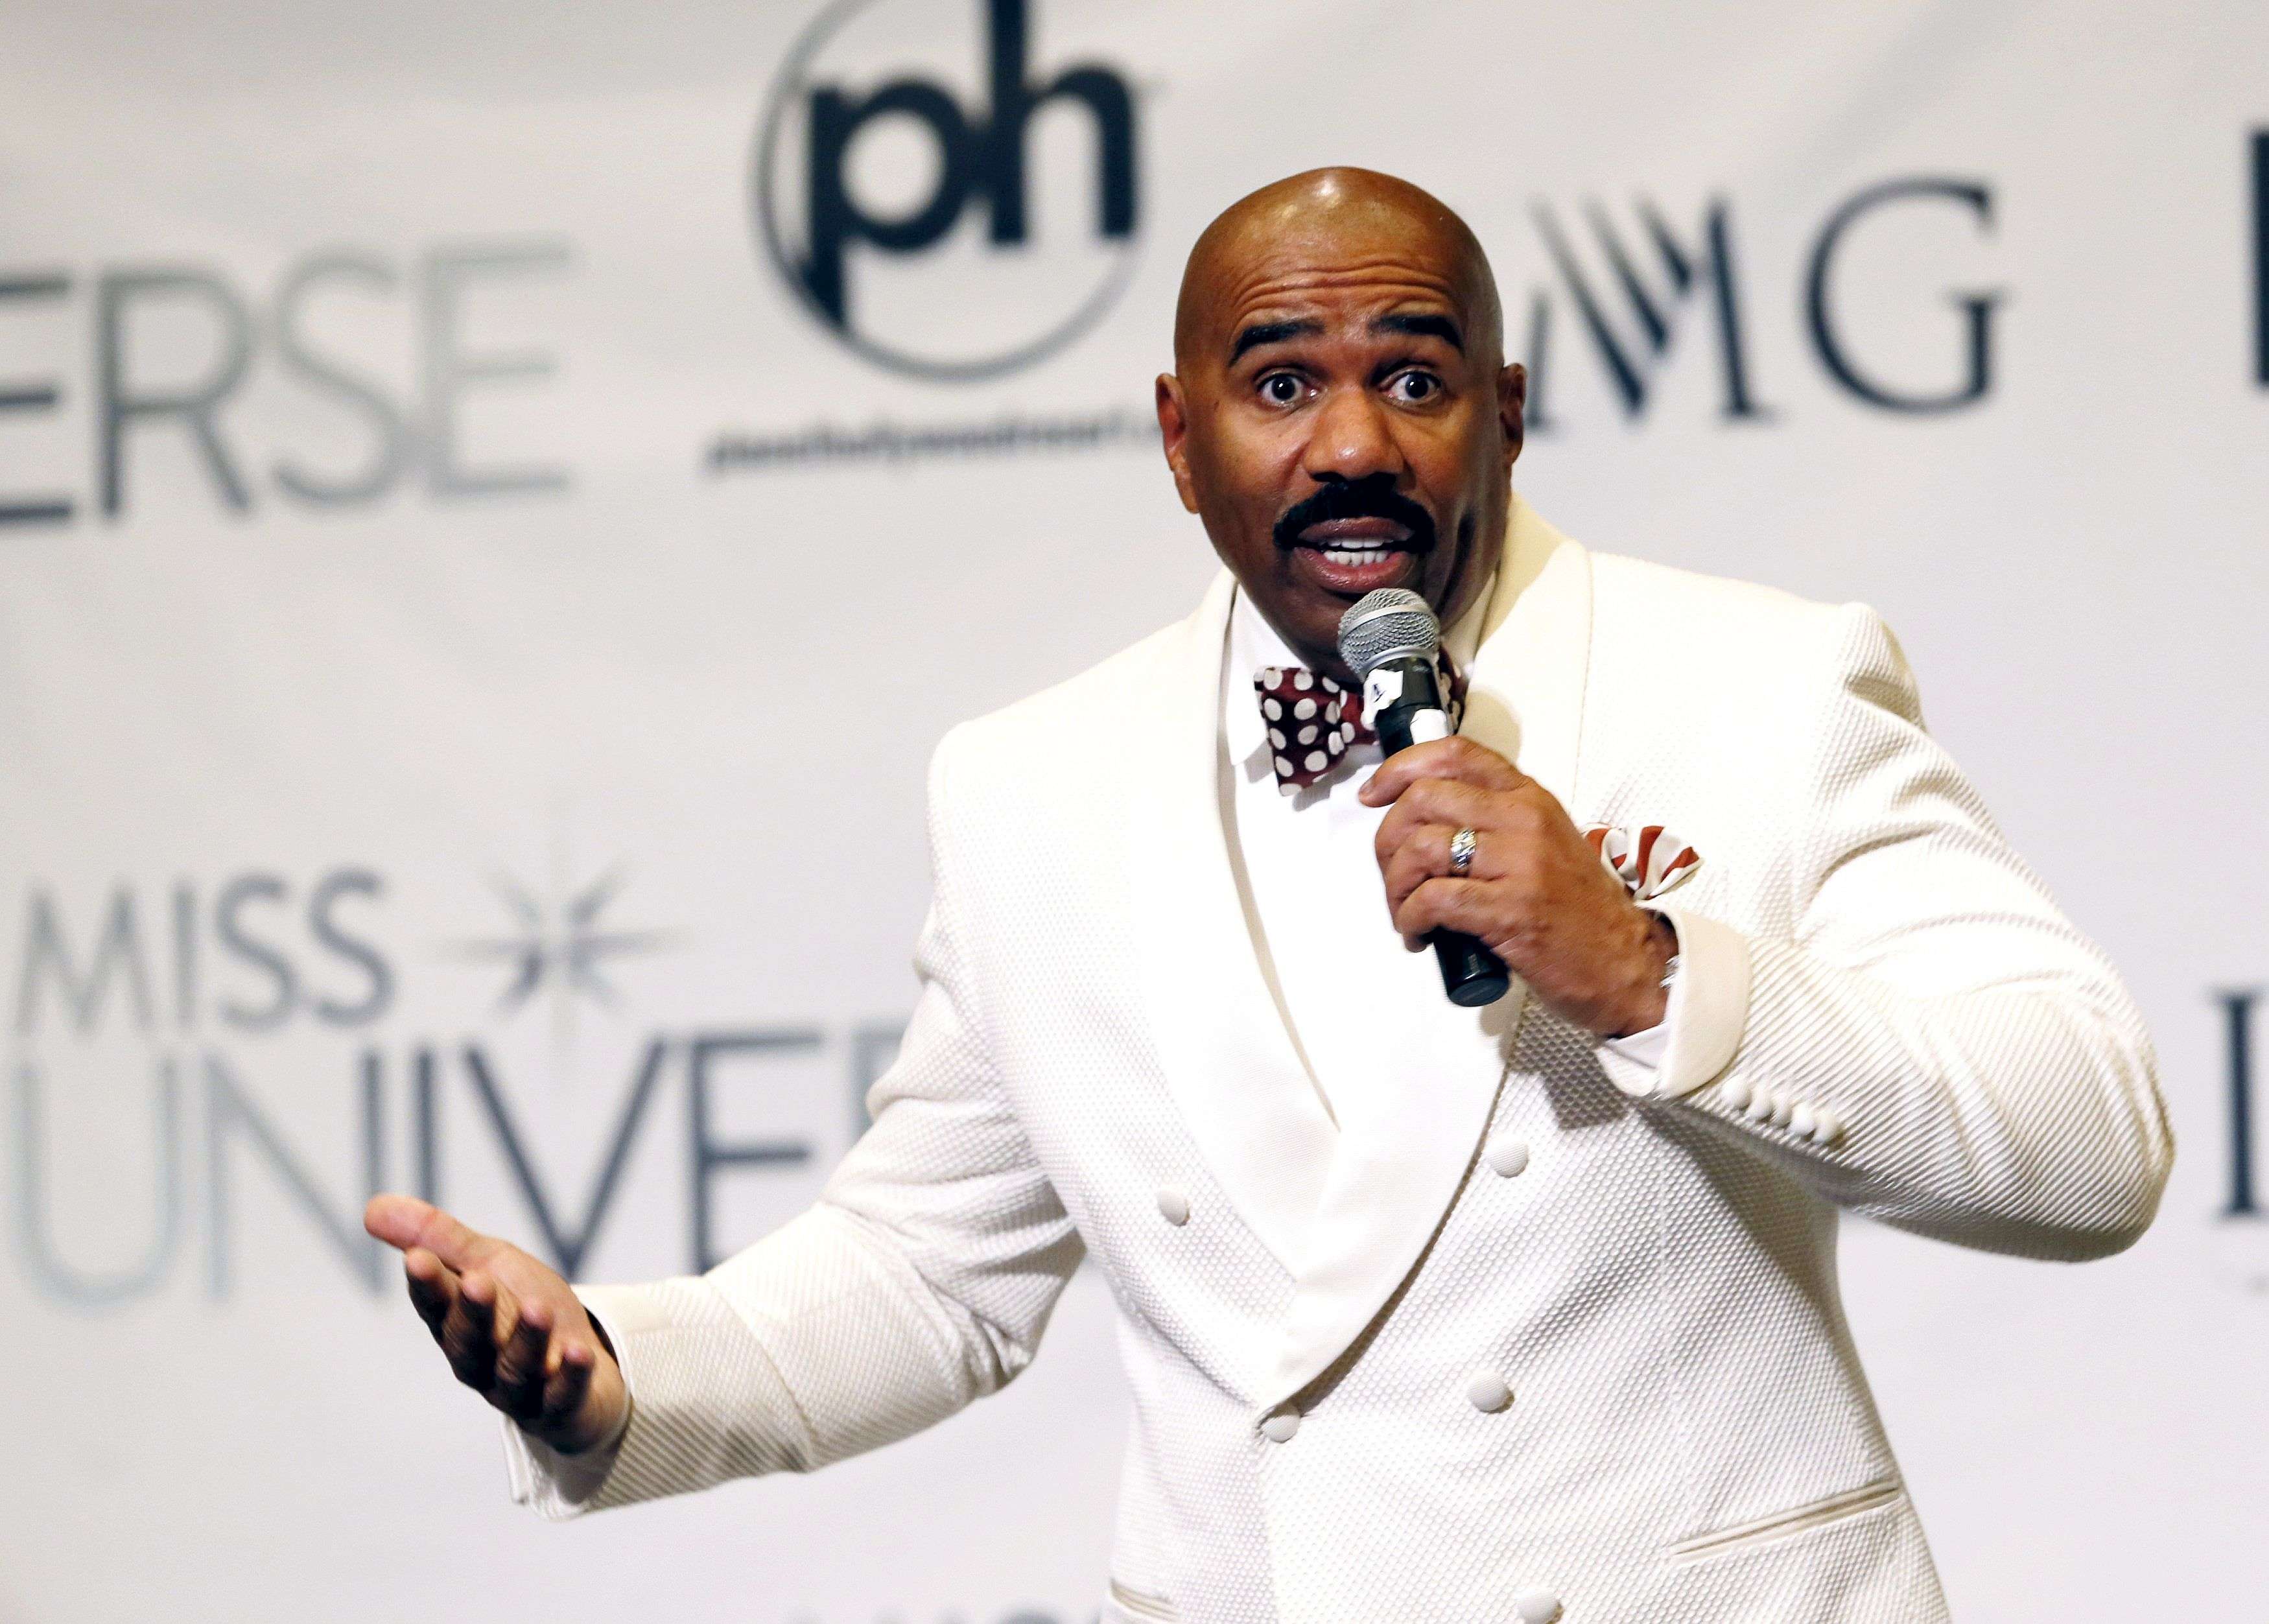 Host Steve Harvey speaks to reporters after the 2015 Miss Universe Pageant in Las Vegas, Nevada, December 20, 2015. Harvey said he misread the card when he made the announcement that Miss Colombia was the winner. Miss Philippines Pia Alonzo Wurtzbach was the actual winner. REUTERS/Steve Marcus ATTENTION EDITORS - FOR EDITORIAL USE ONLY. NOT FOR SALE FOR MARKETING OR ADVERTISING CAMPAIGNS